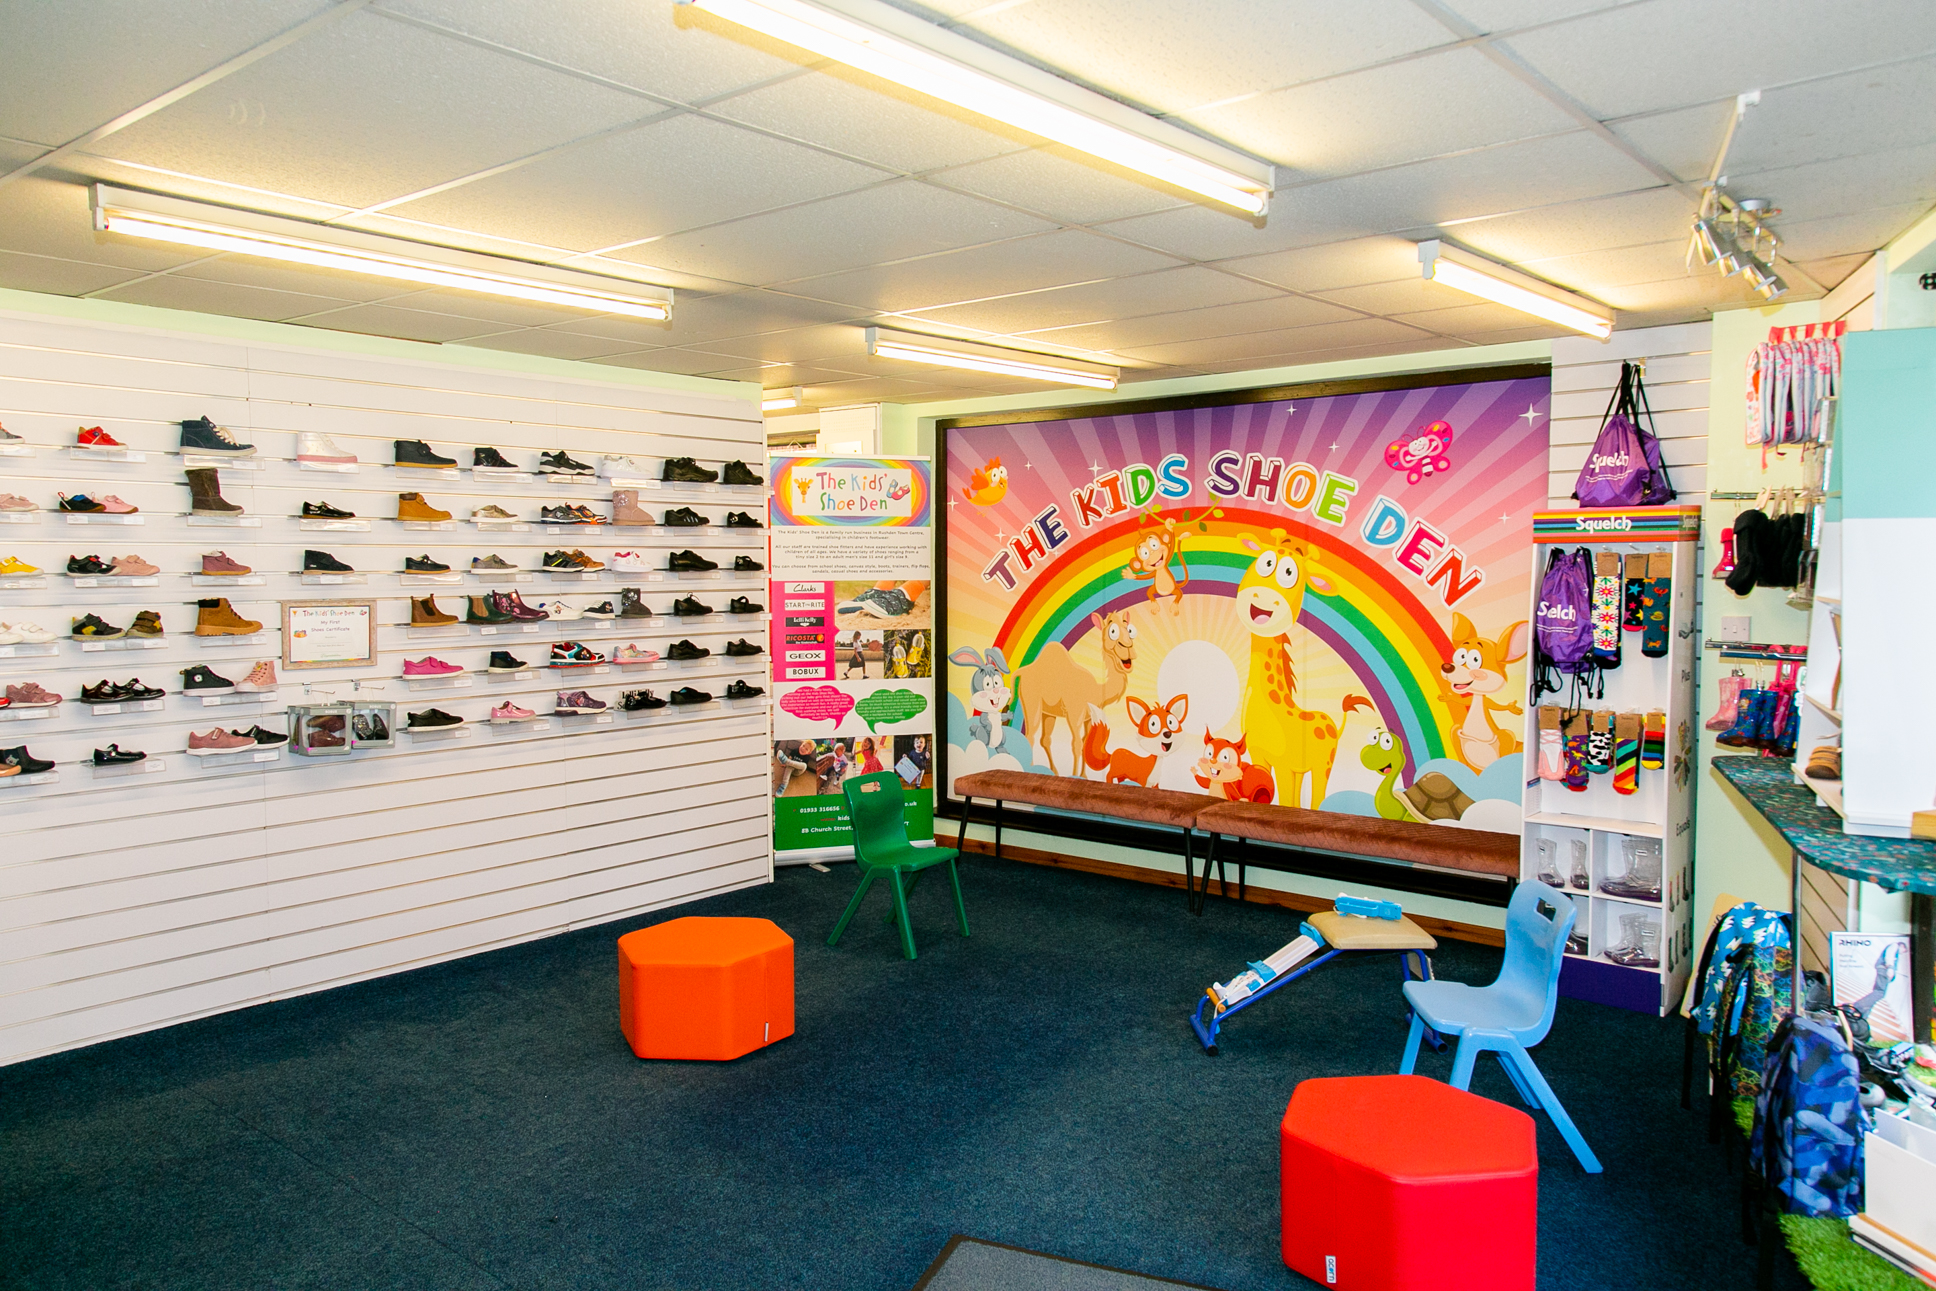 Kids Shoe Den - in store with back wall